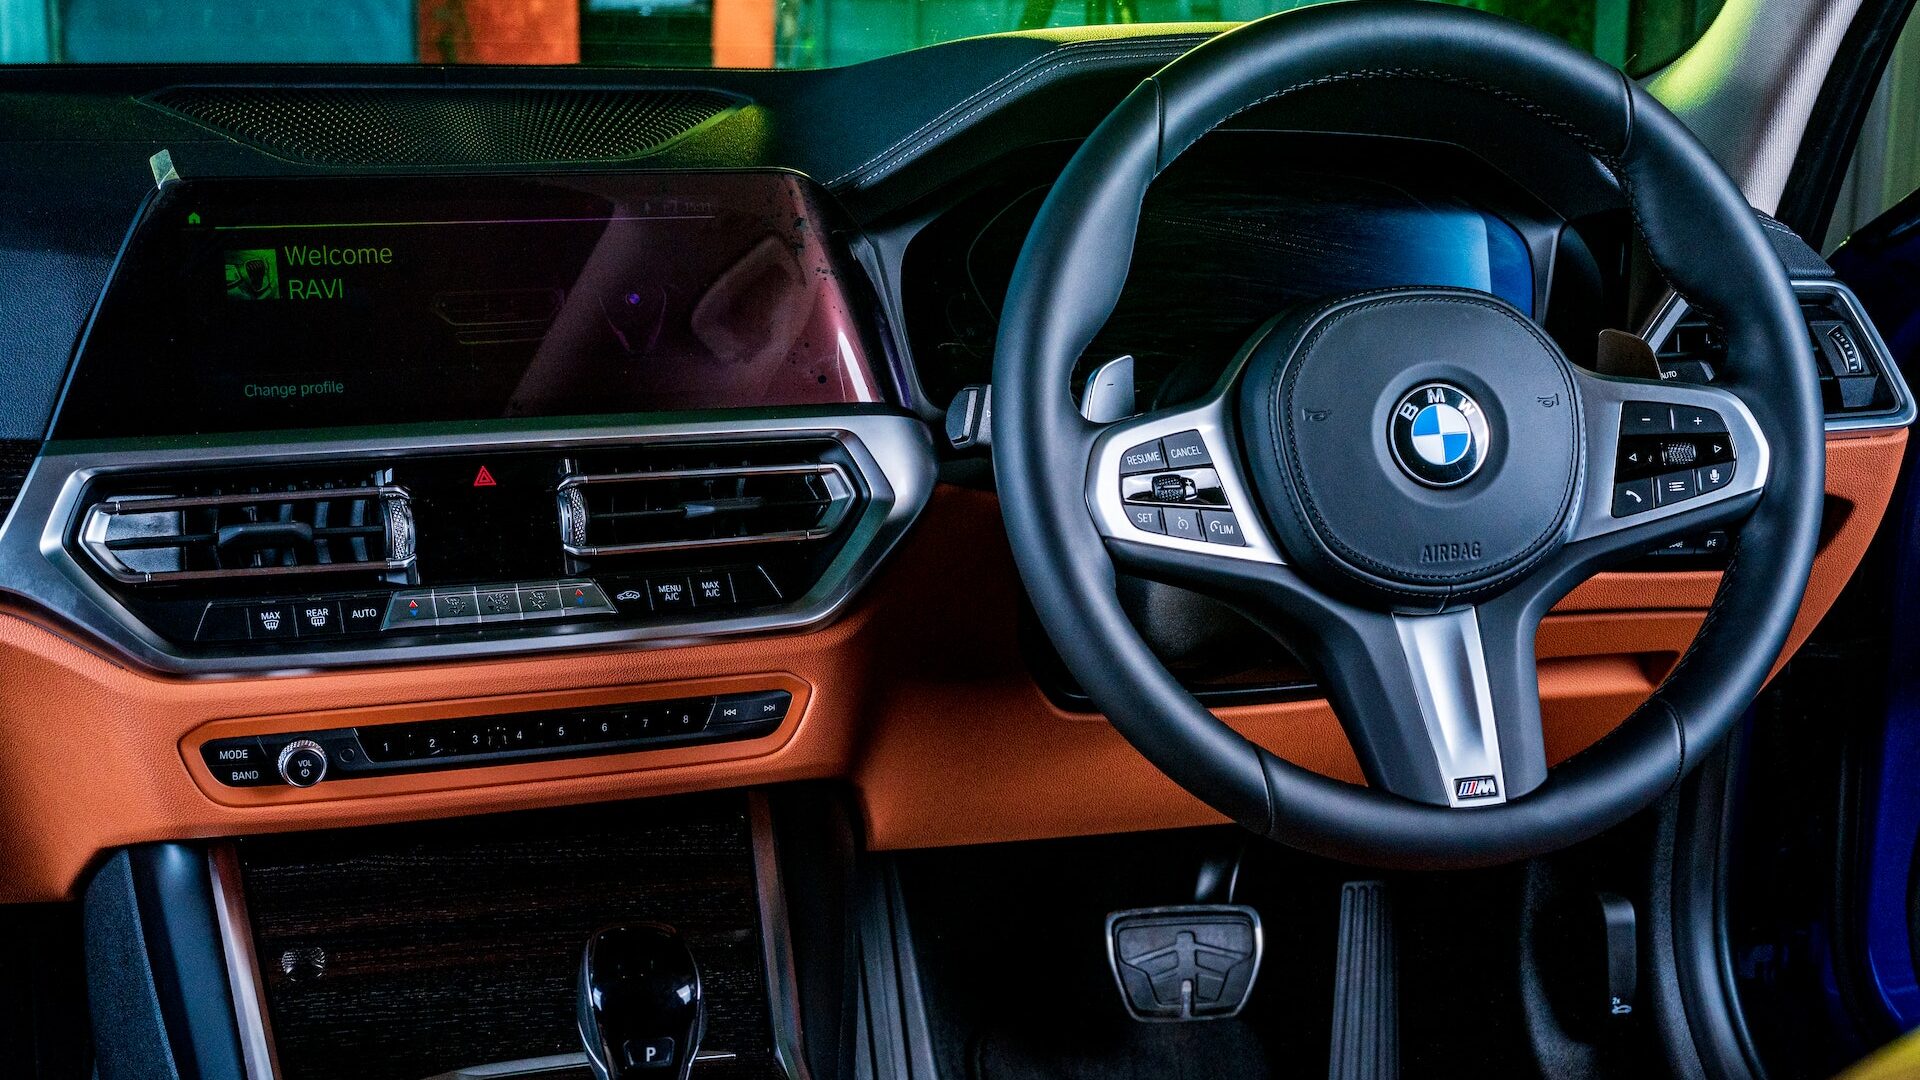 The BMW Convenience Package Explained